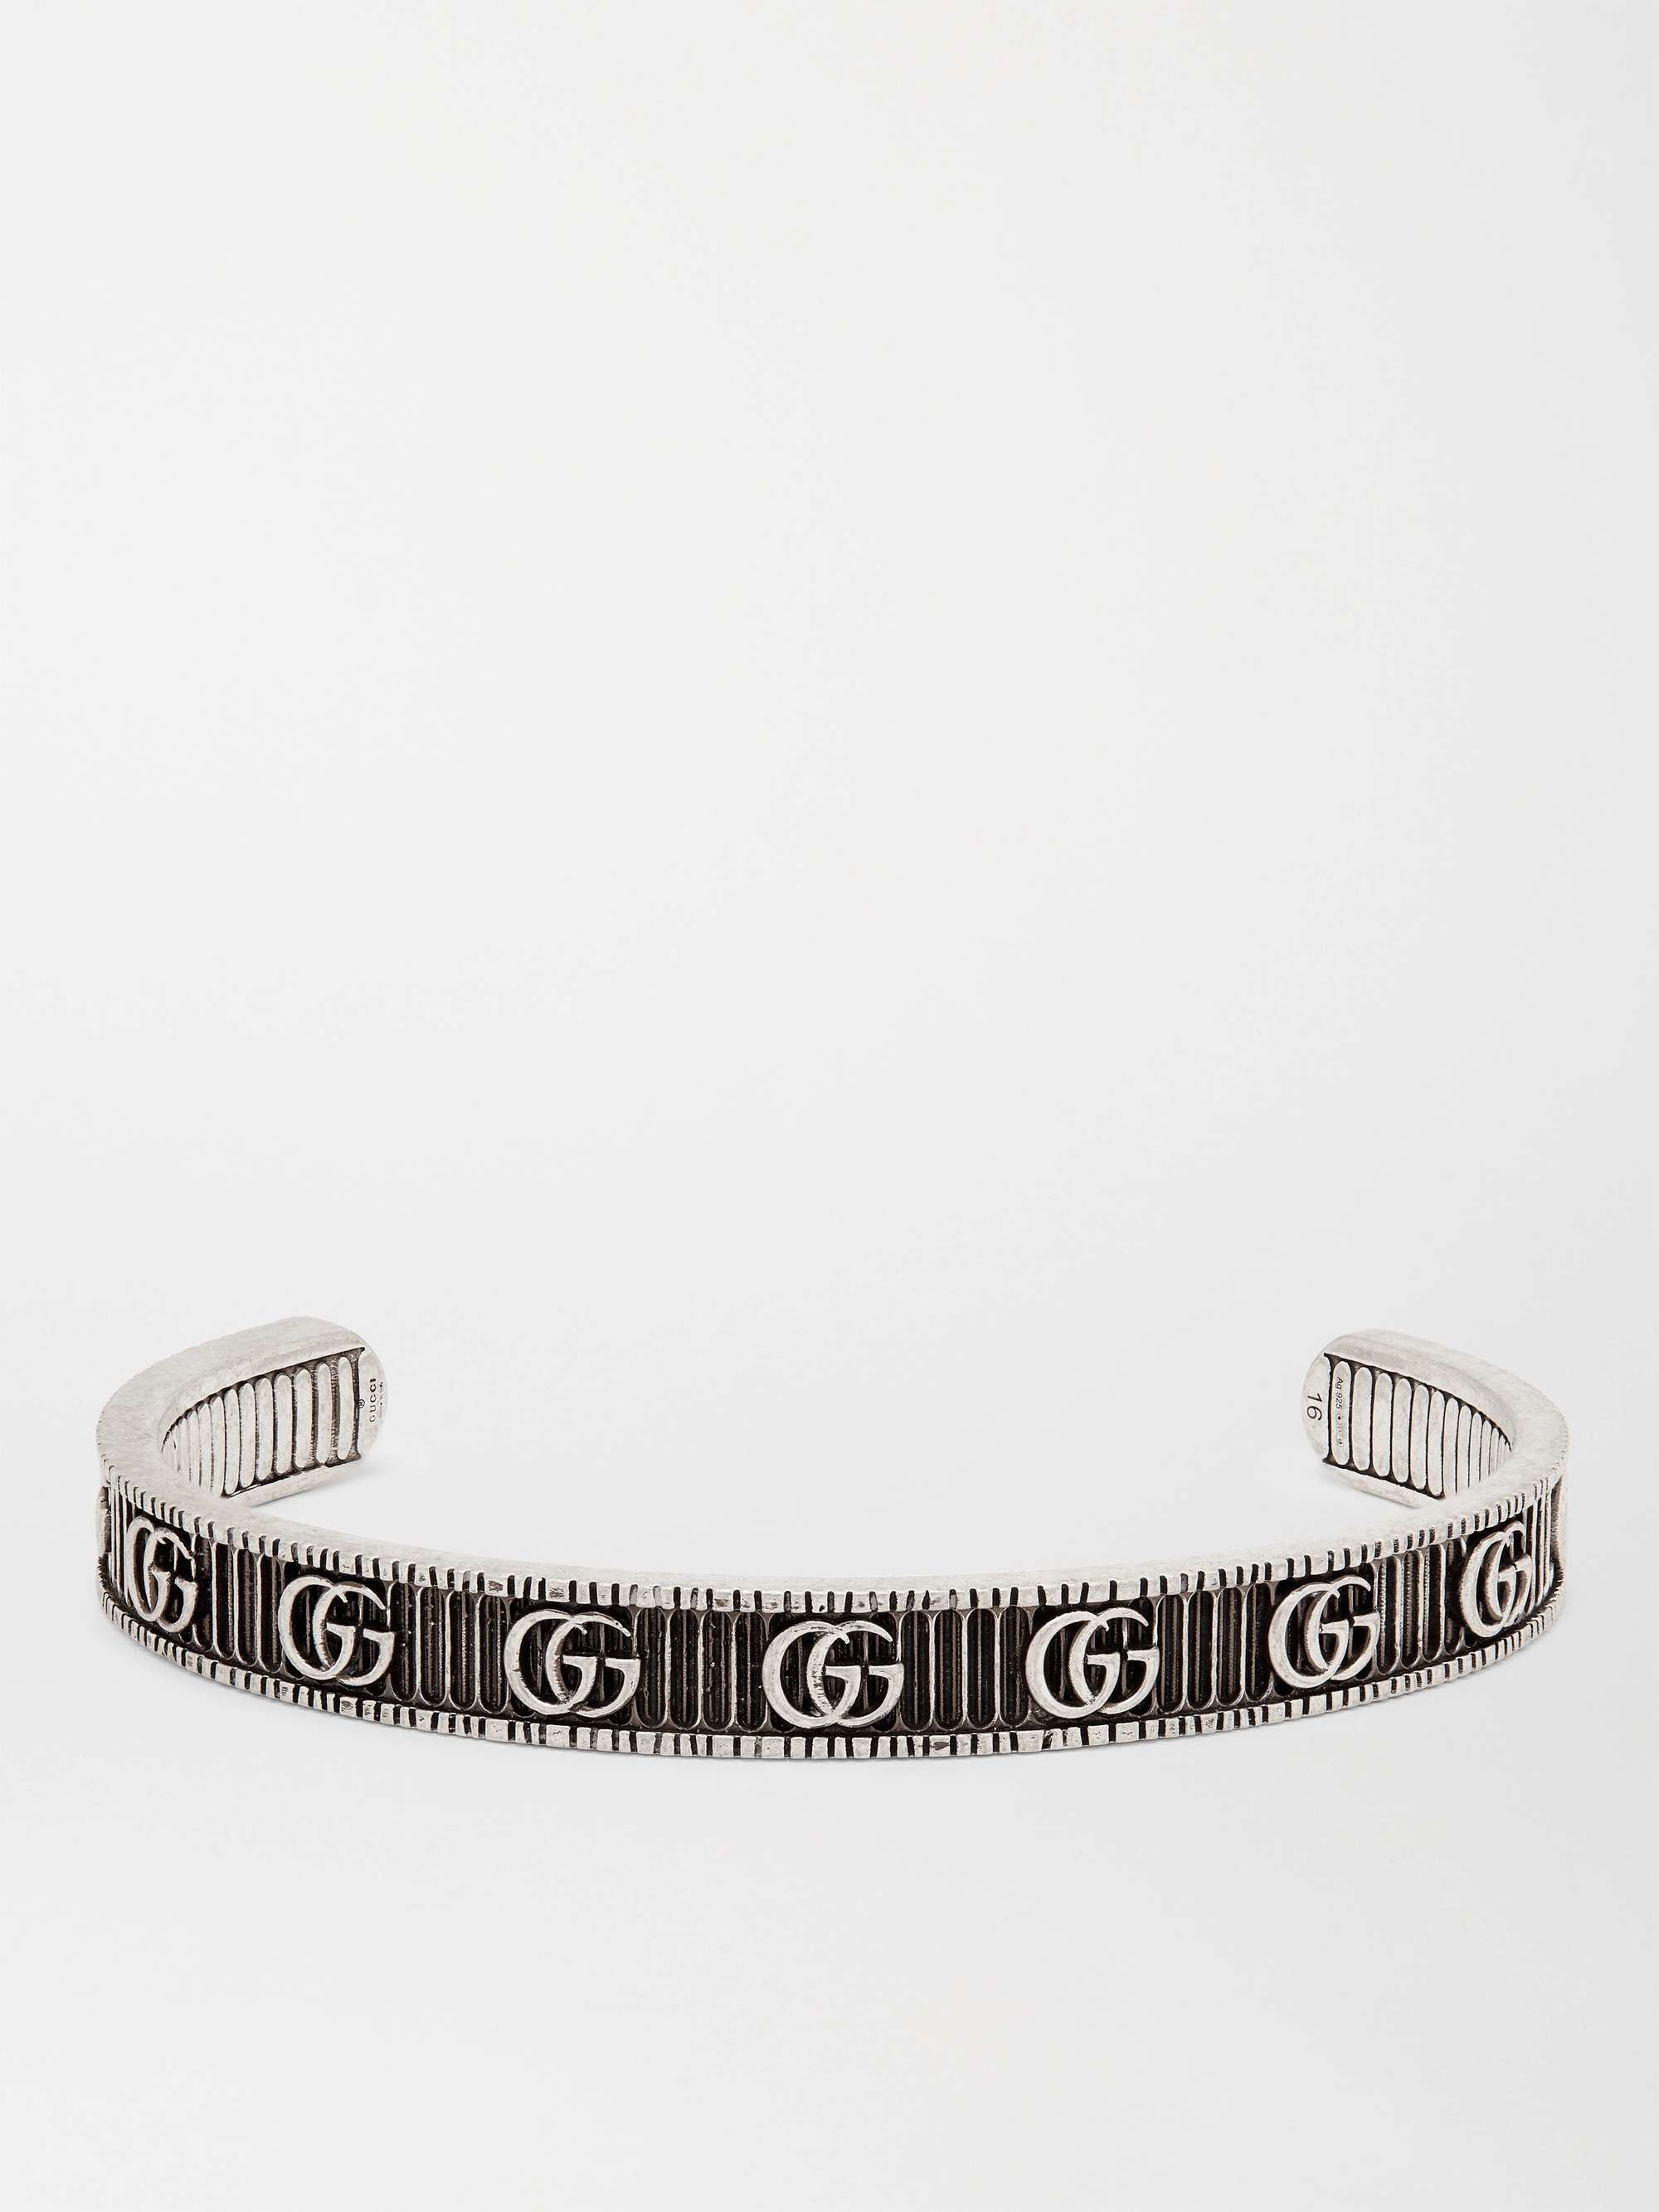 GUCCI Engraved Burnished Sterling Silver Cuff | MR PORTER